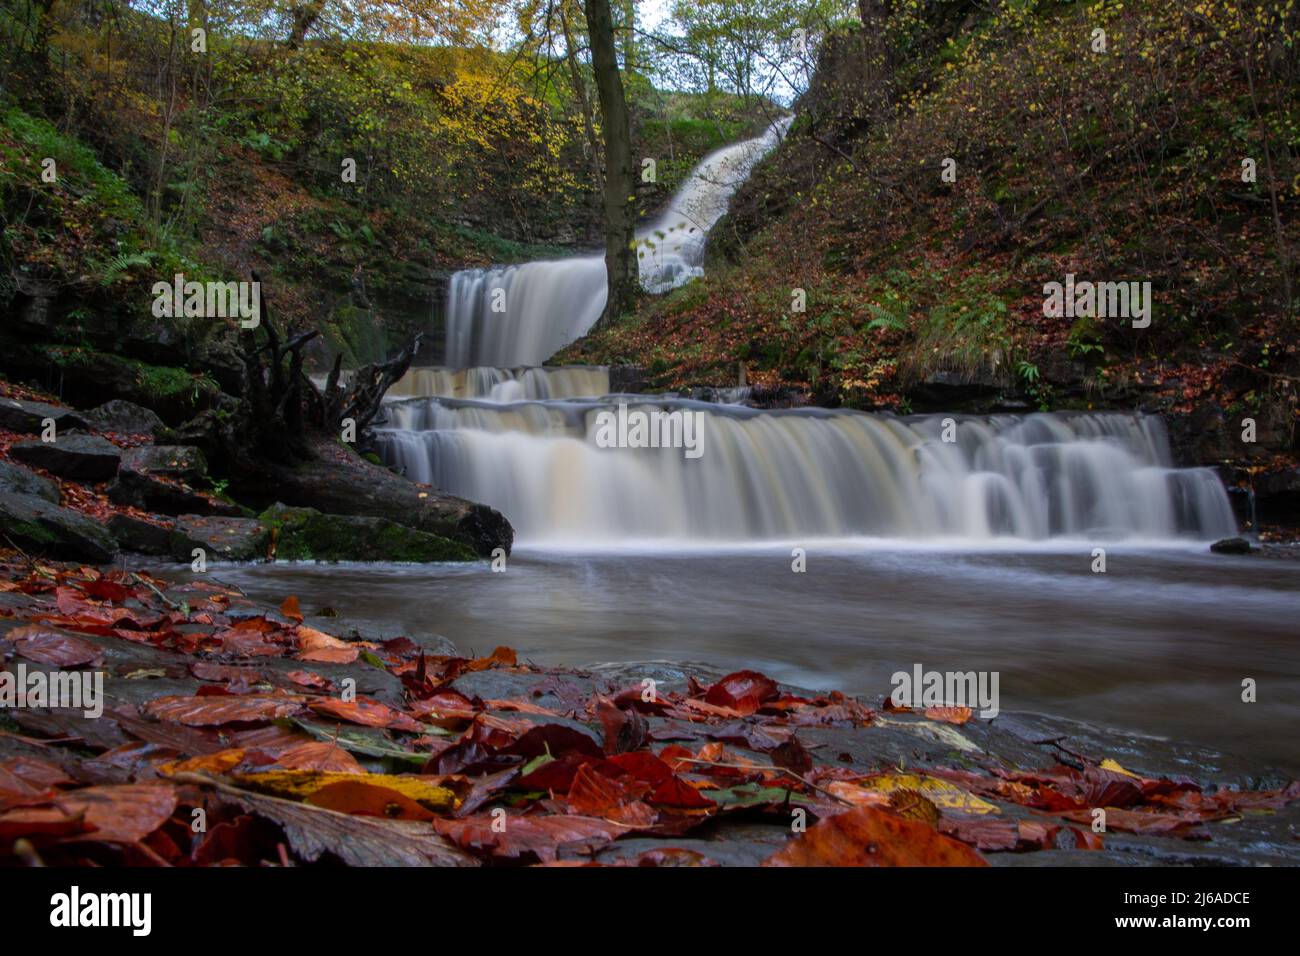 Scaleber Force, located in the Northern area of the Yorkshire dales near Settle. Stock Photo